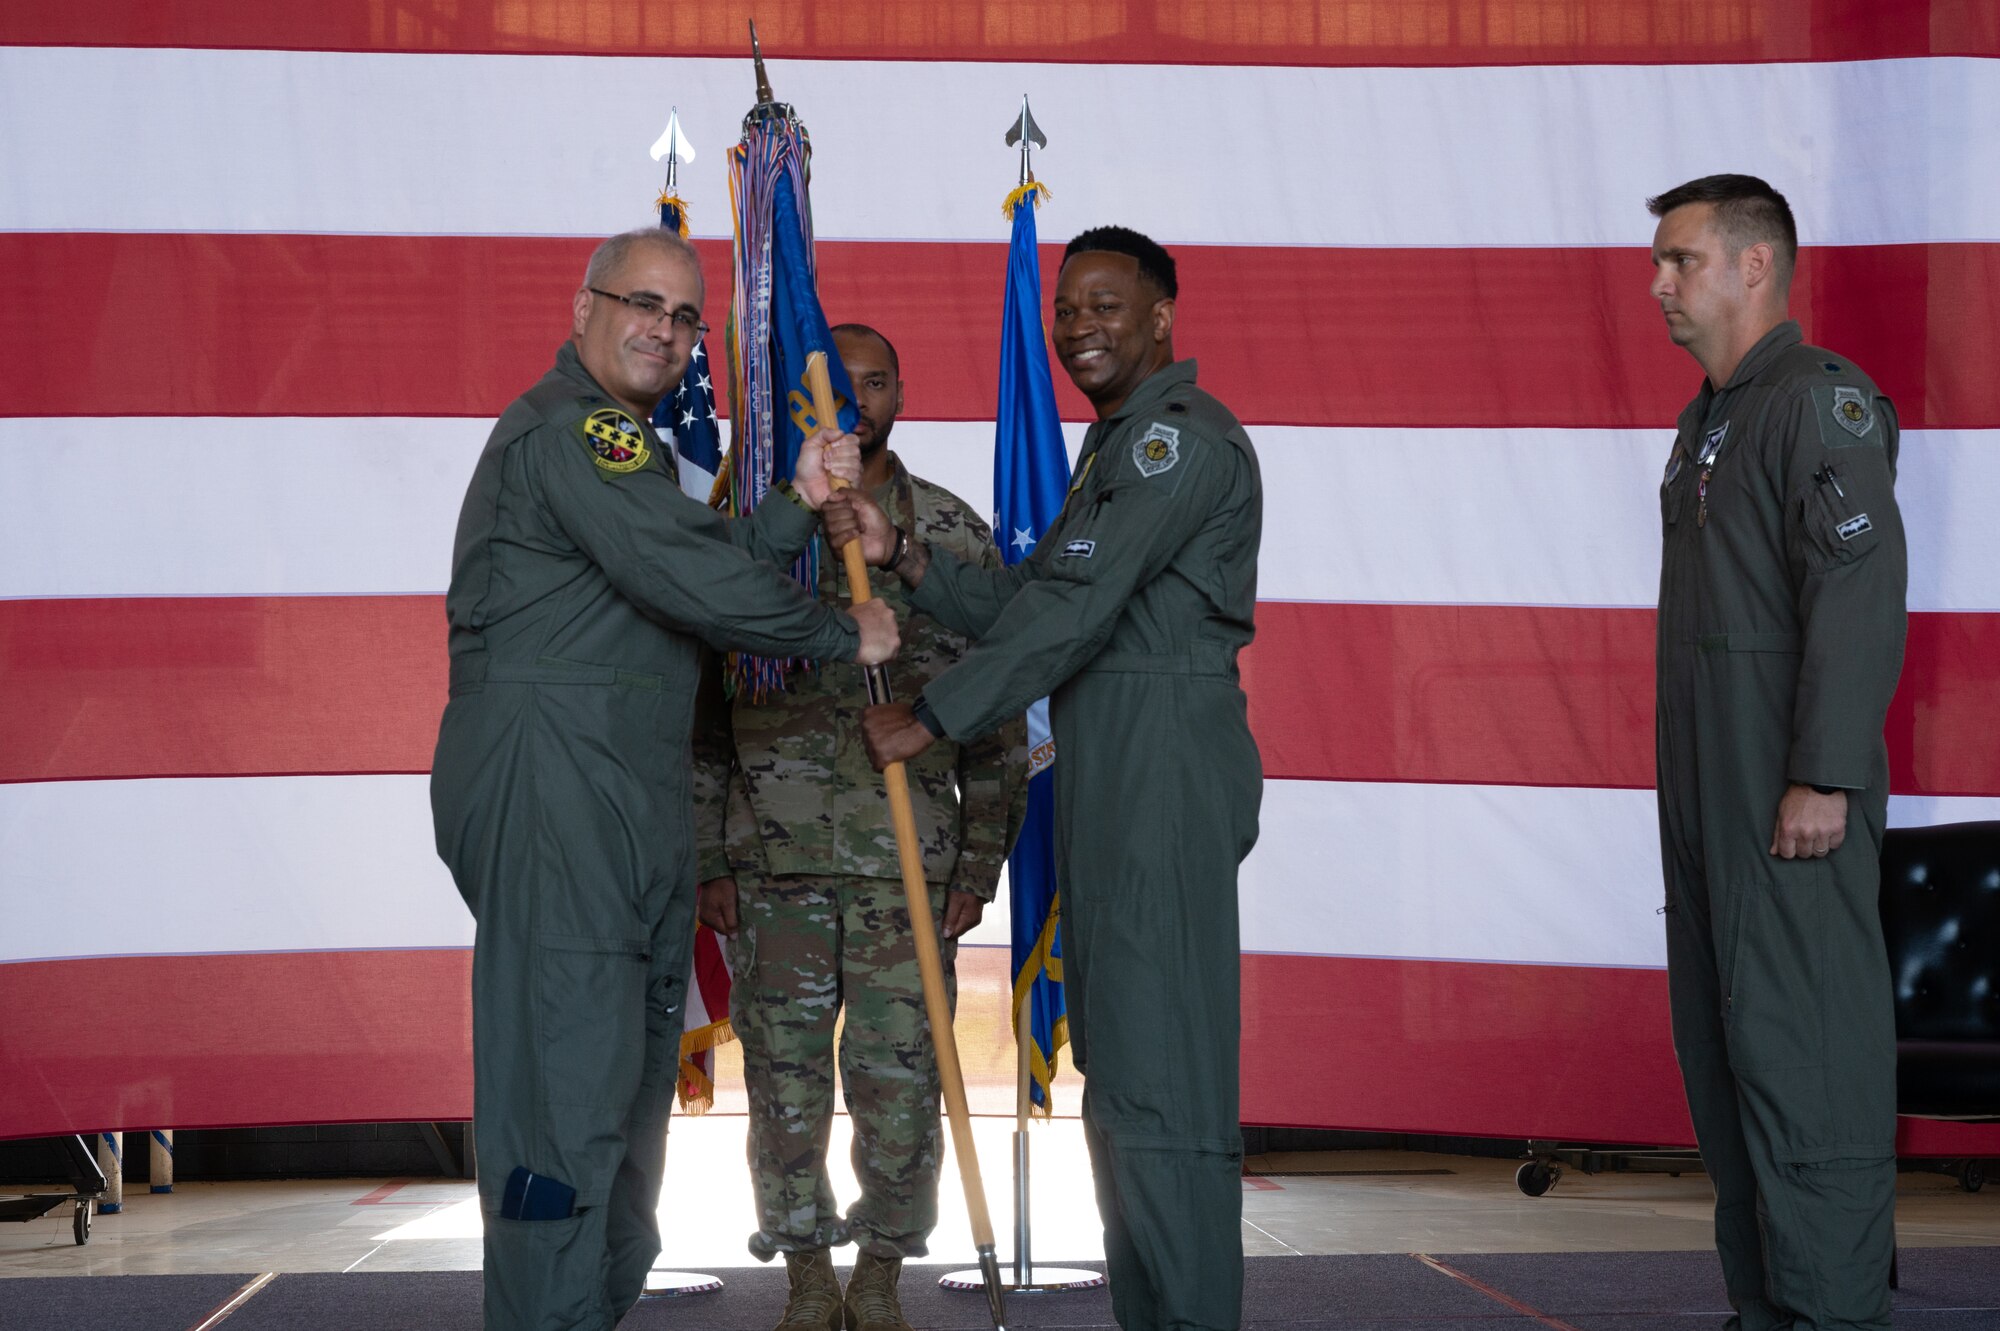 U.S. Air Force Col. Daniel Alford, 7th Operations
Group commander, presents the guidon to Lt. Col.
Brian Milner, incoming 9th Bomb Squadron
commander, during the 9th BS change of command
ceremony at Dyess Air Force Base, Texas, July 7,
2023. Milner is in charge of leading the 9th BS which
is the oldest active bomb squadron in the Air Force
and maintains combat readiness to ensure delivery of
rapid and decisive airpower on a large scale in
support of conventional warfare taskings around the
world. (U.S. Air Force photo by Airman 1st Class
Alondra Cristobal Hernandez)